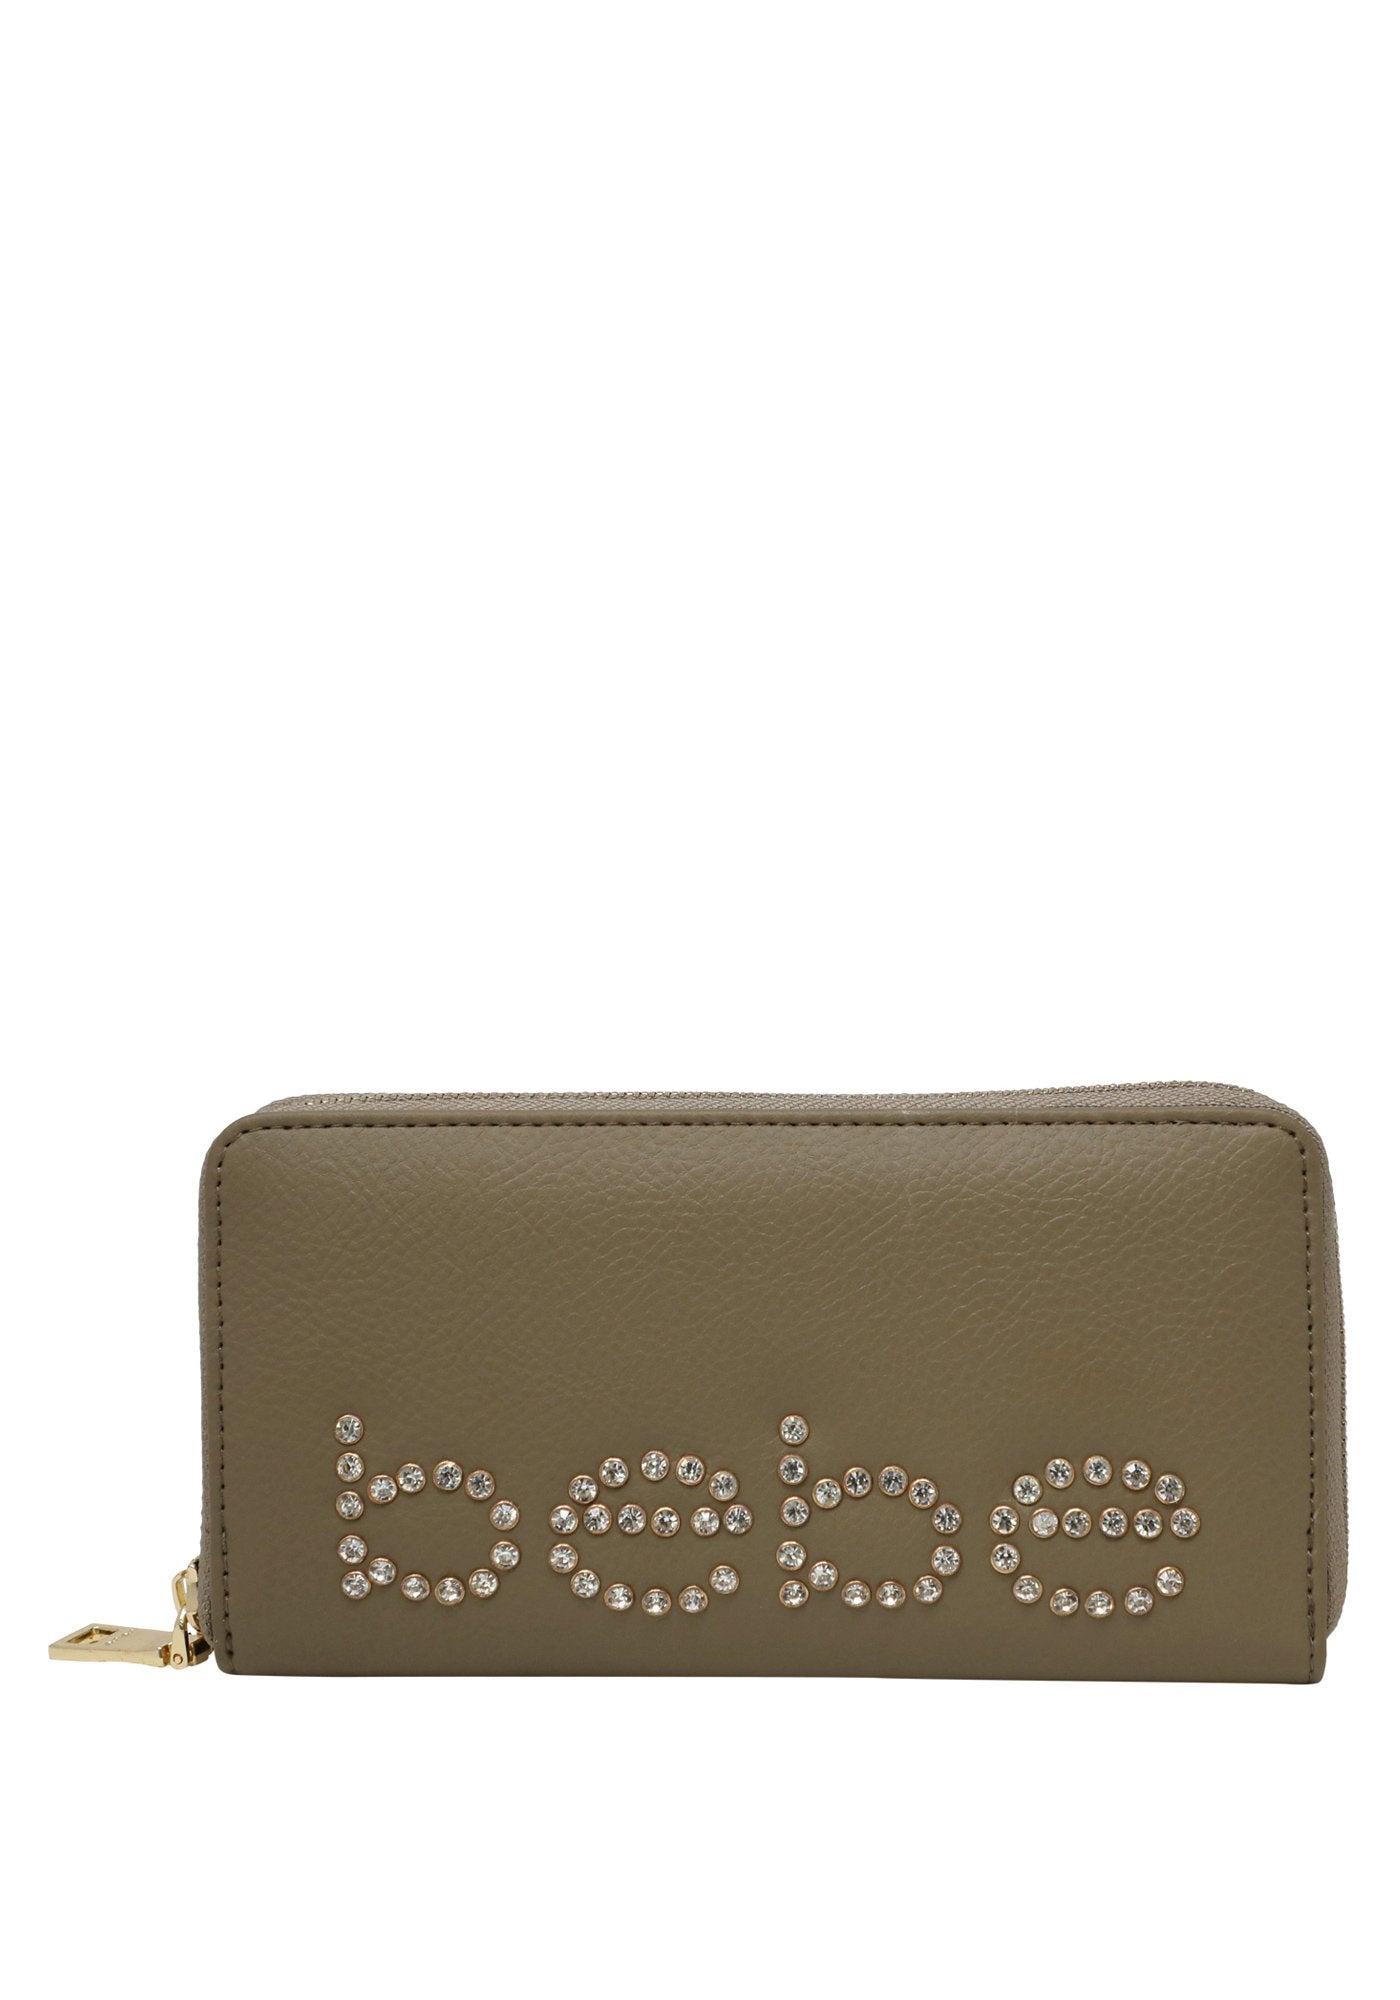 Bebe Women S Jetta Zip Around Wallet Size Os In Taupe Polyurethane From Bebe Accuweather Shop